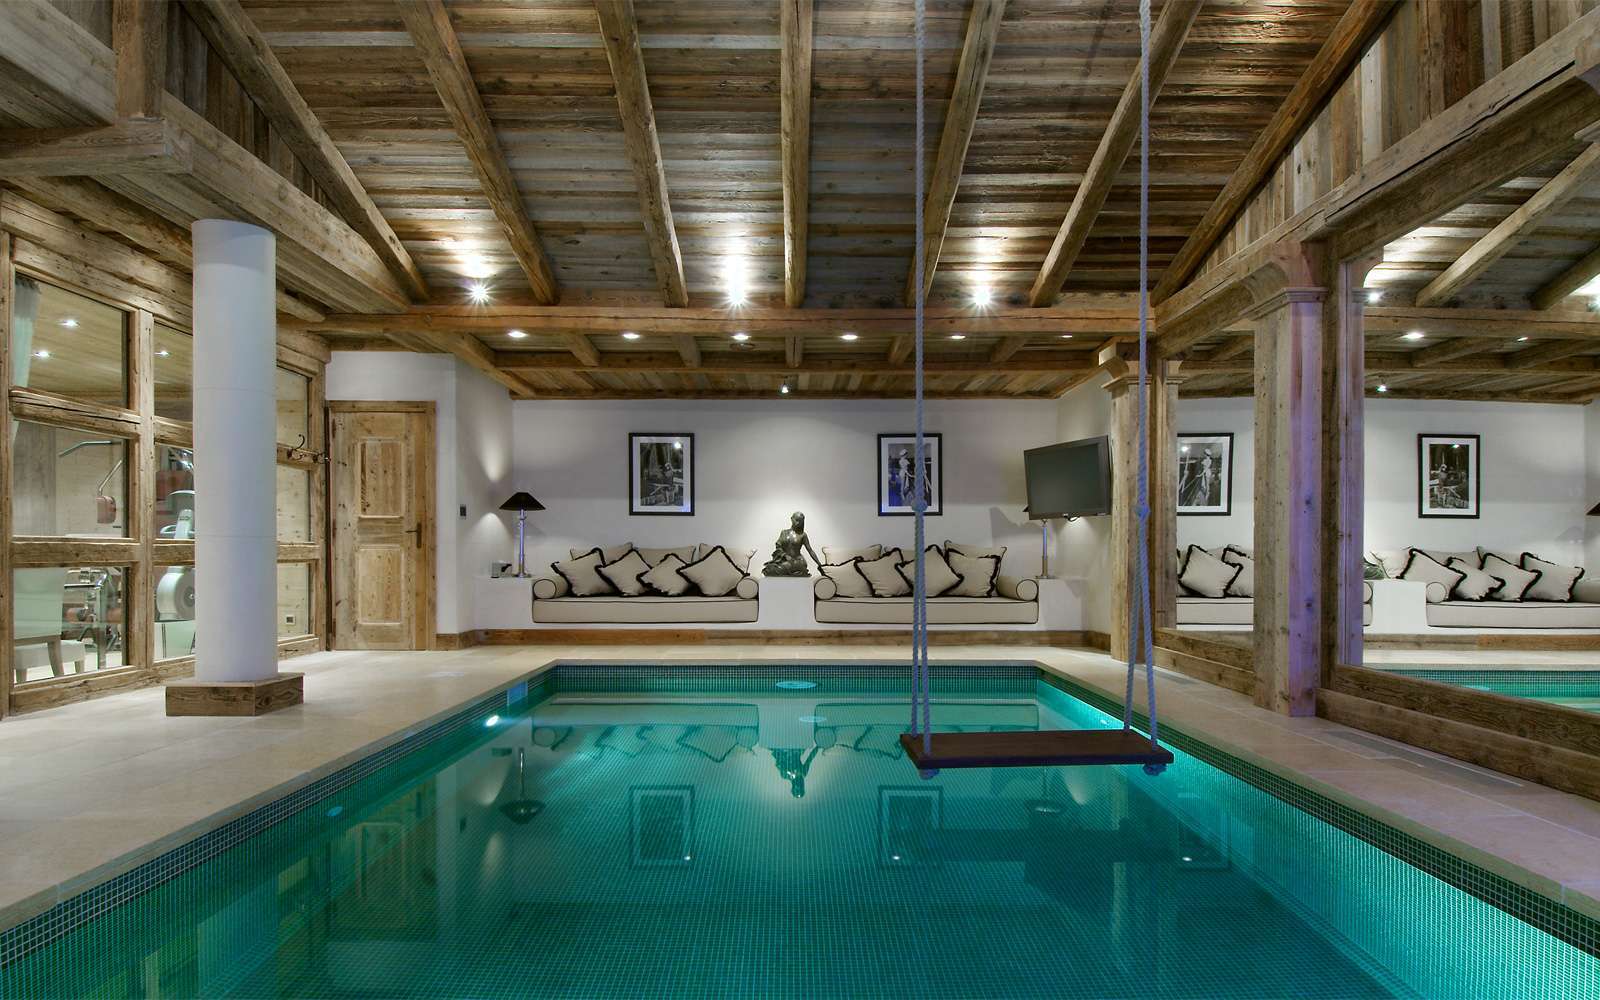 Kings-avenue-courchevel-sauna-jacuzzi-hammam-swimming-pool-childfriendly-parking-cinema-gym-boot-heaters-fireplace-lift-massage-room-area-courchevel-019-12